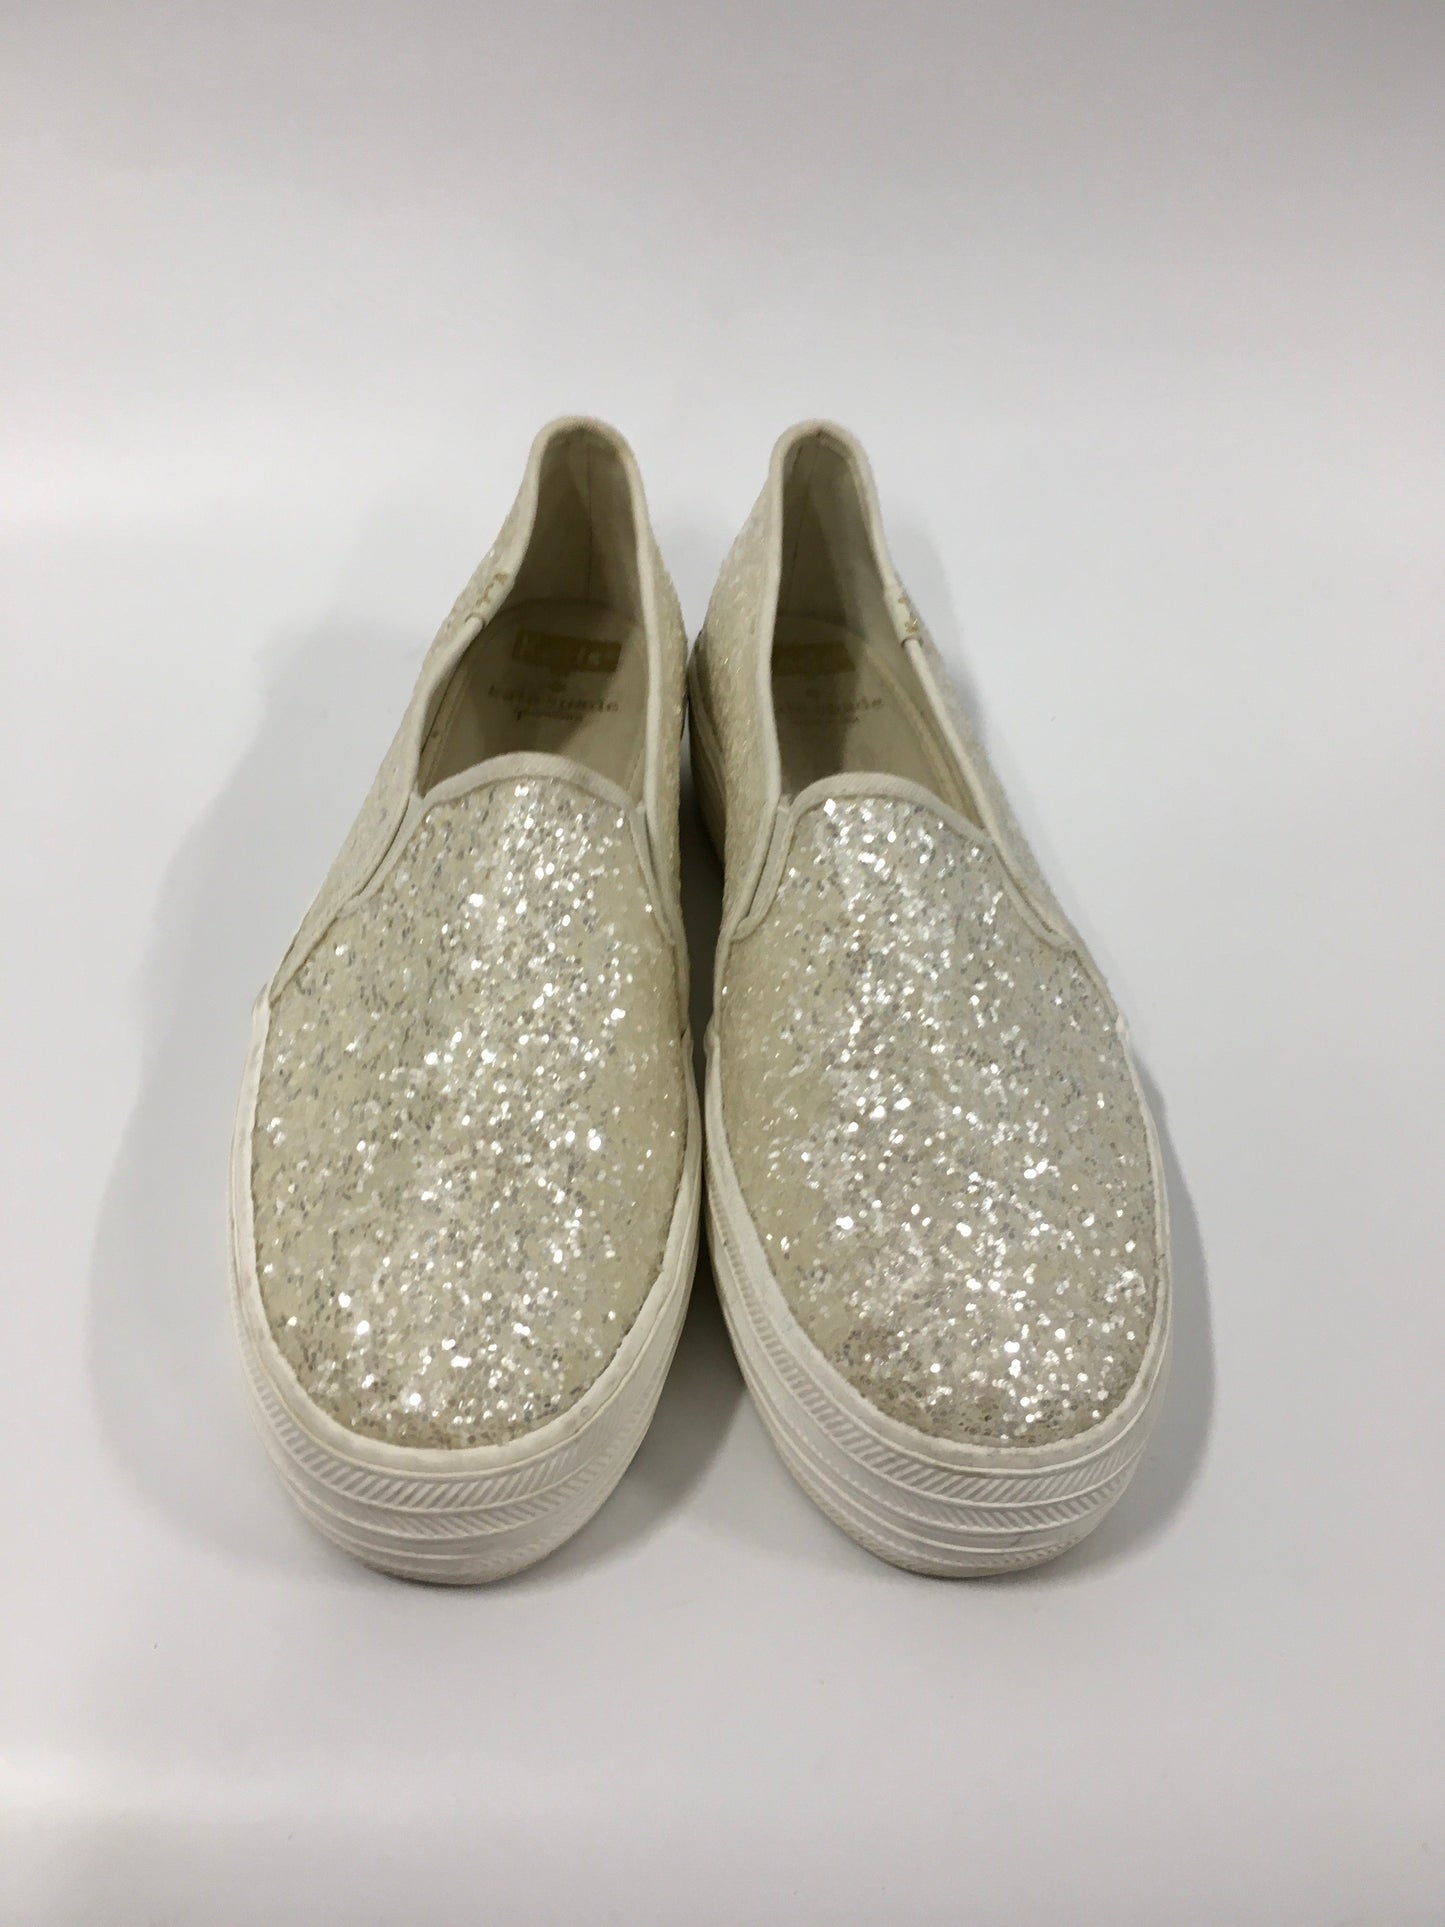 Cream Shoes Flats Other Keds, Size 10